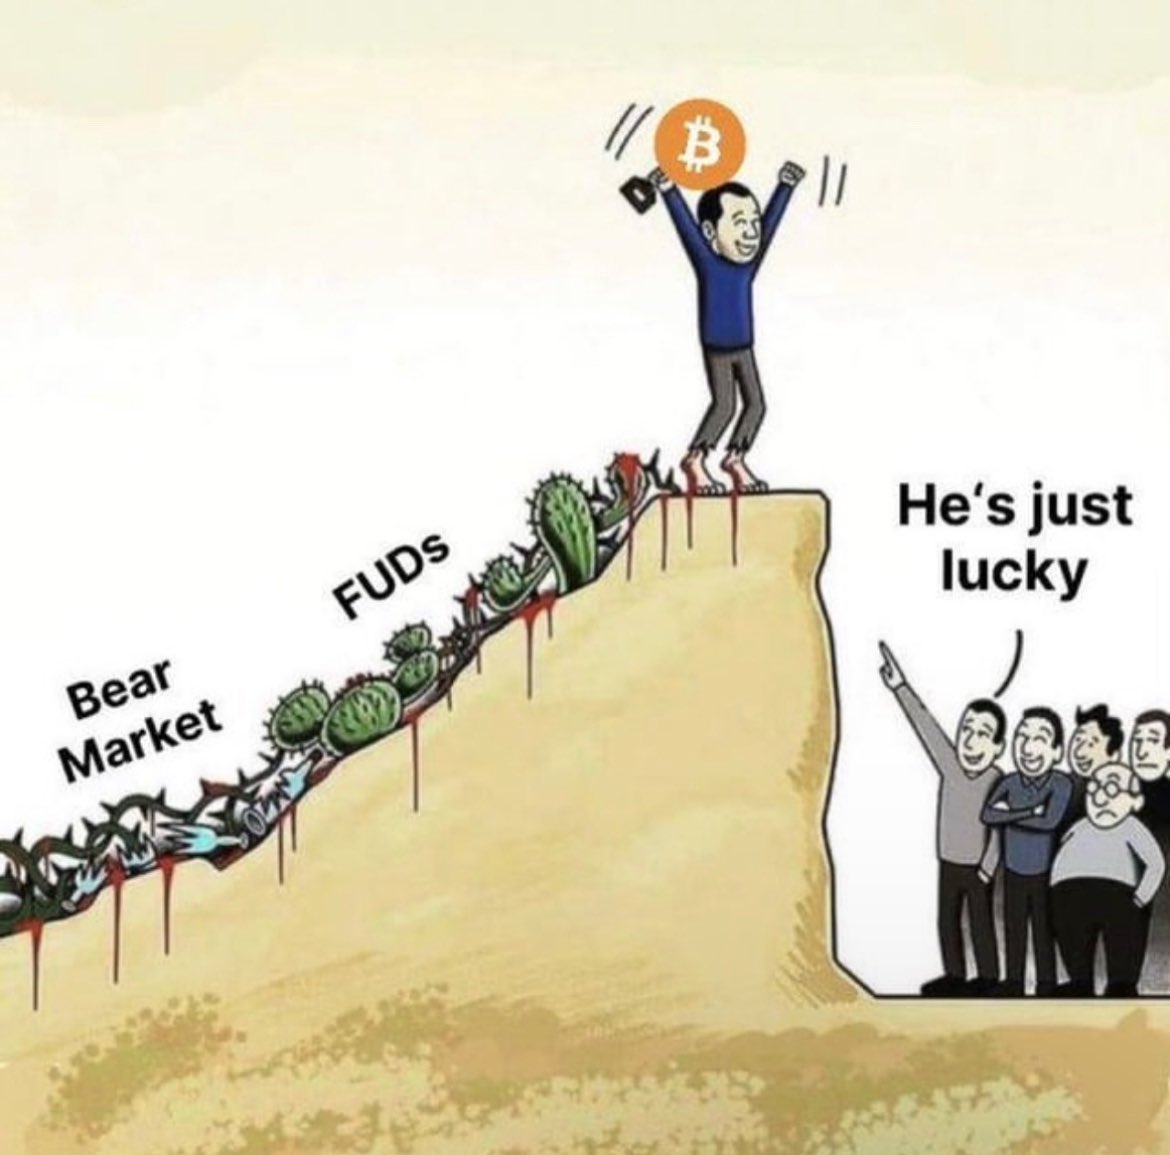 HODL THE #BTC!! We were 20k last year, NEVER EVER SODL!